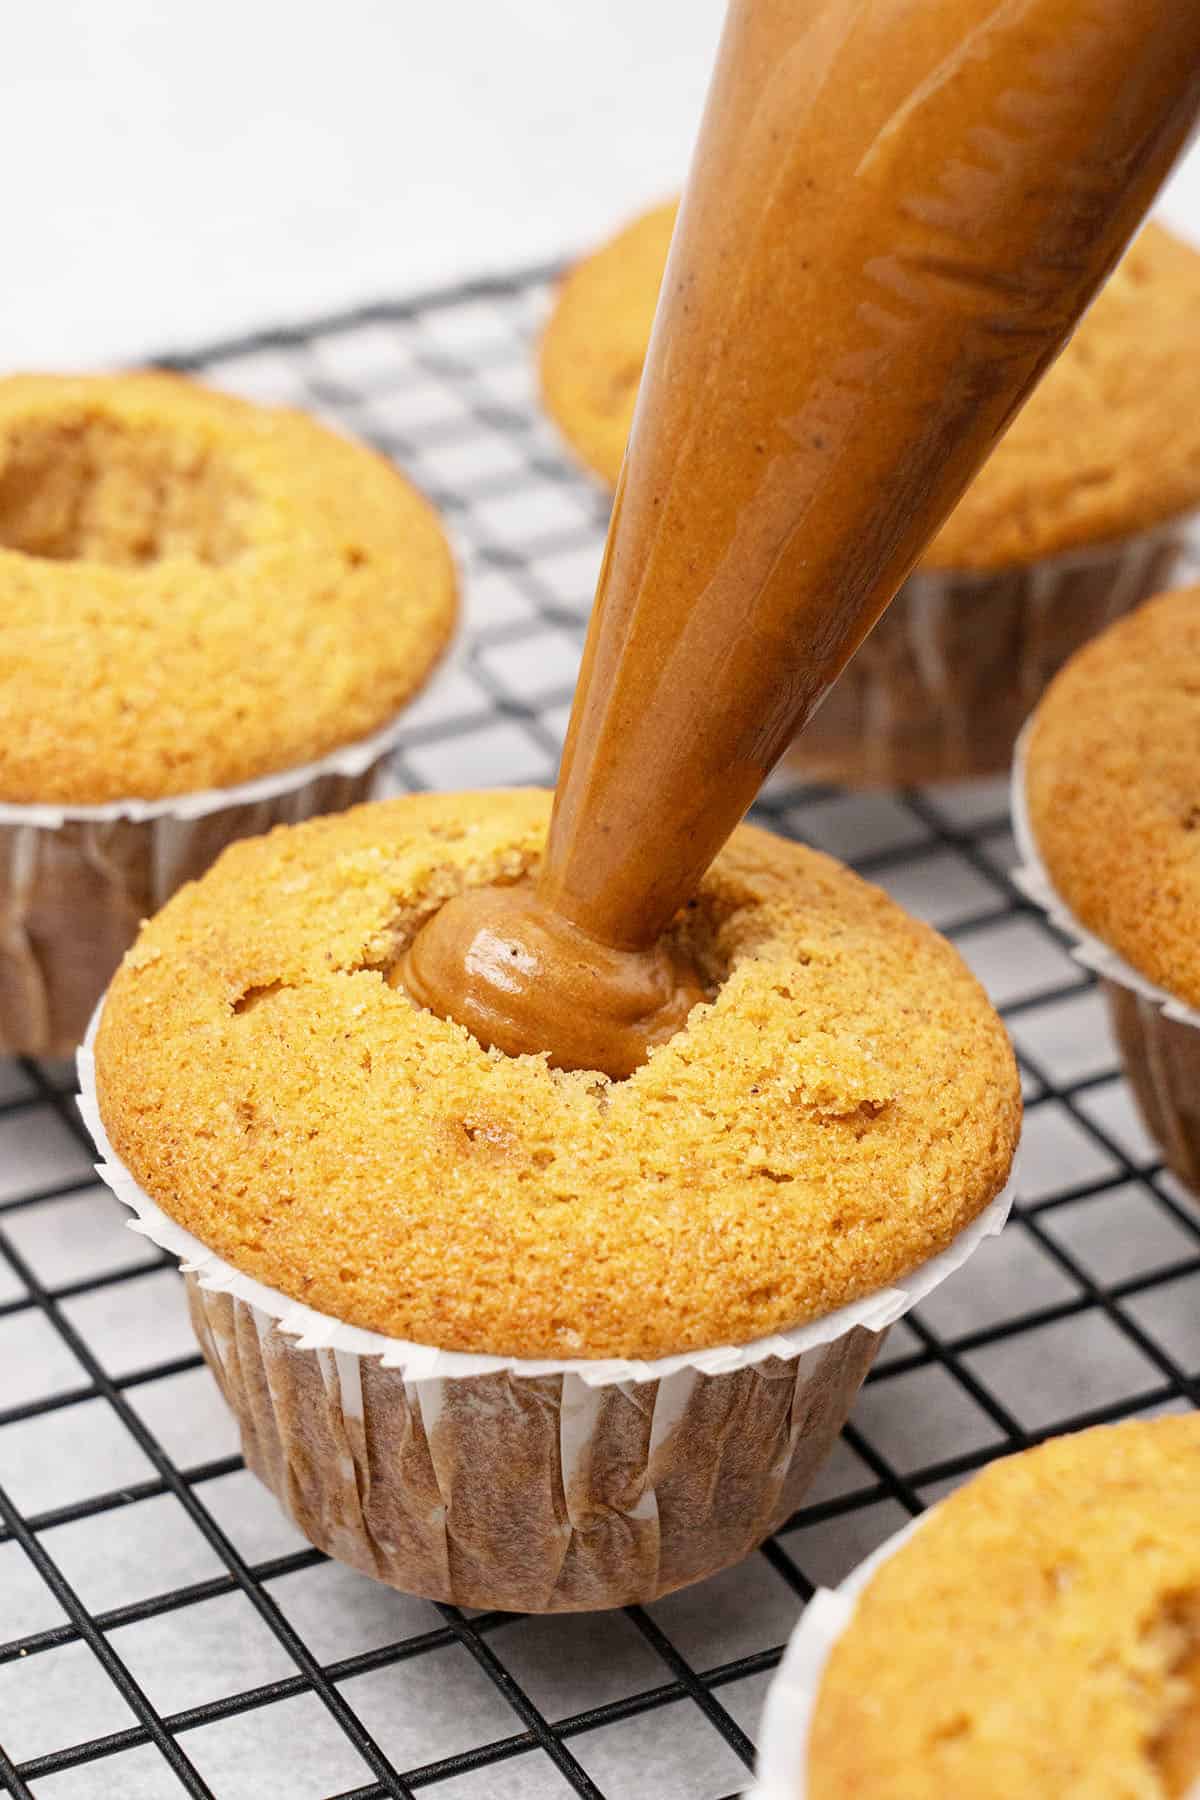 filling a cupcake with Biscoff spread.